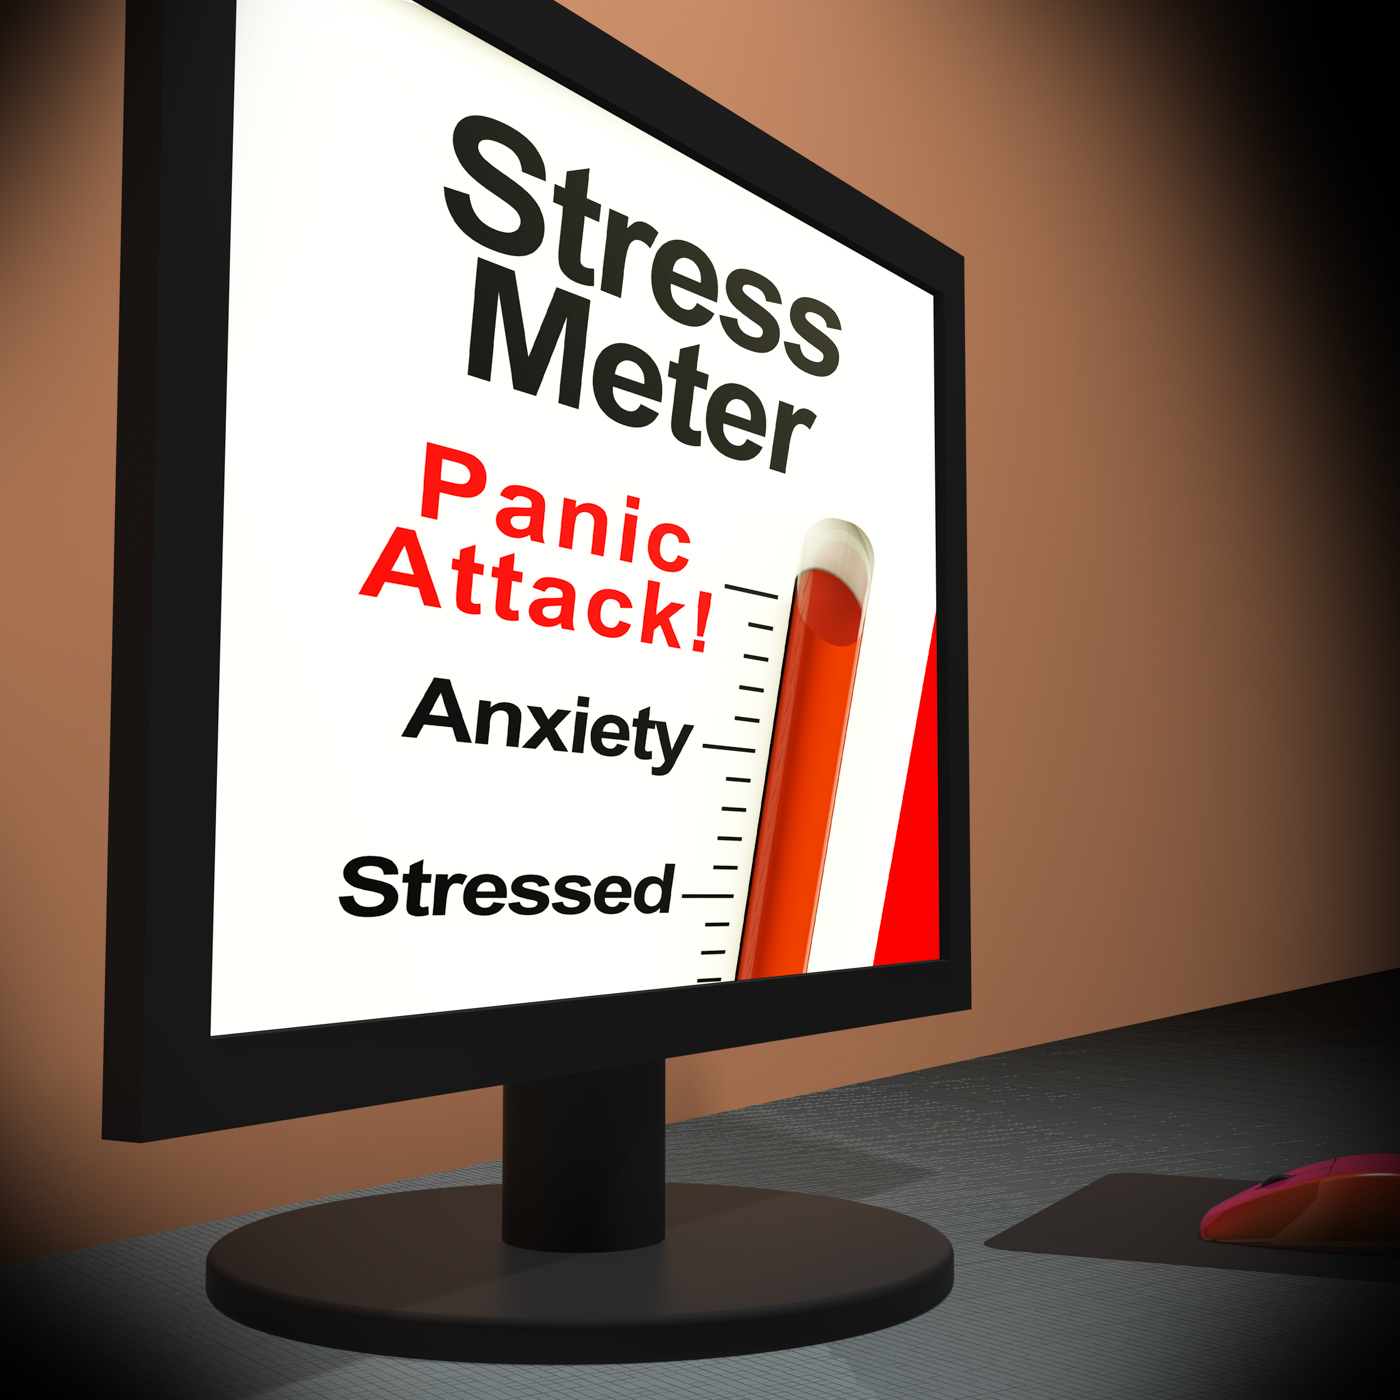 Stress Meter On Laptop Showing Panic Attack, Anxiety, Laptop, Upset, Troubled, HQ Photo